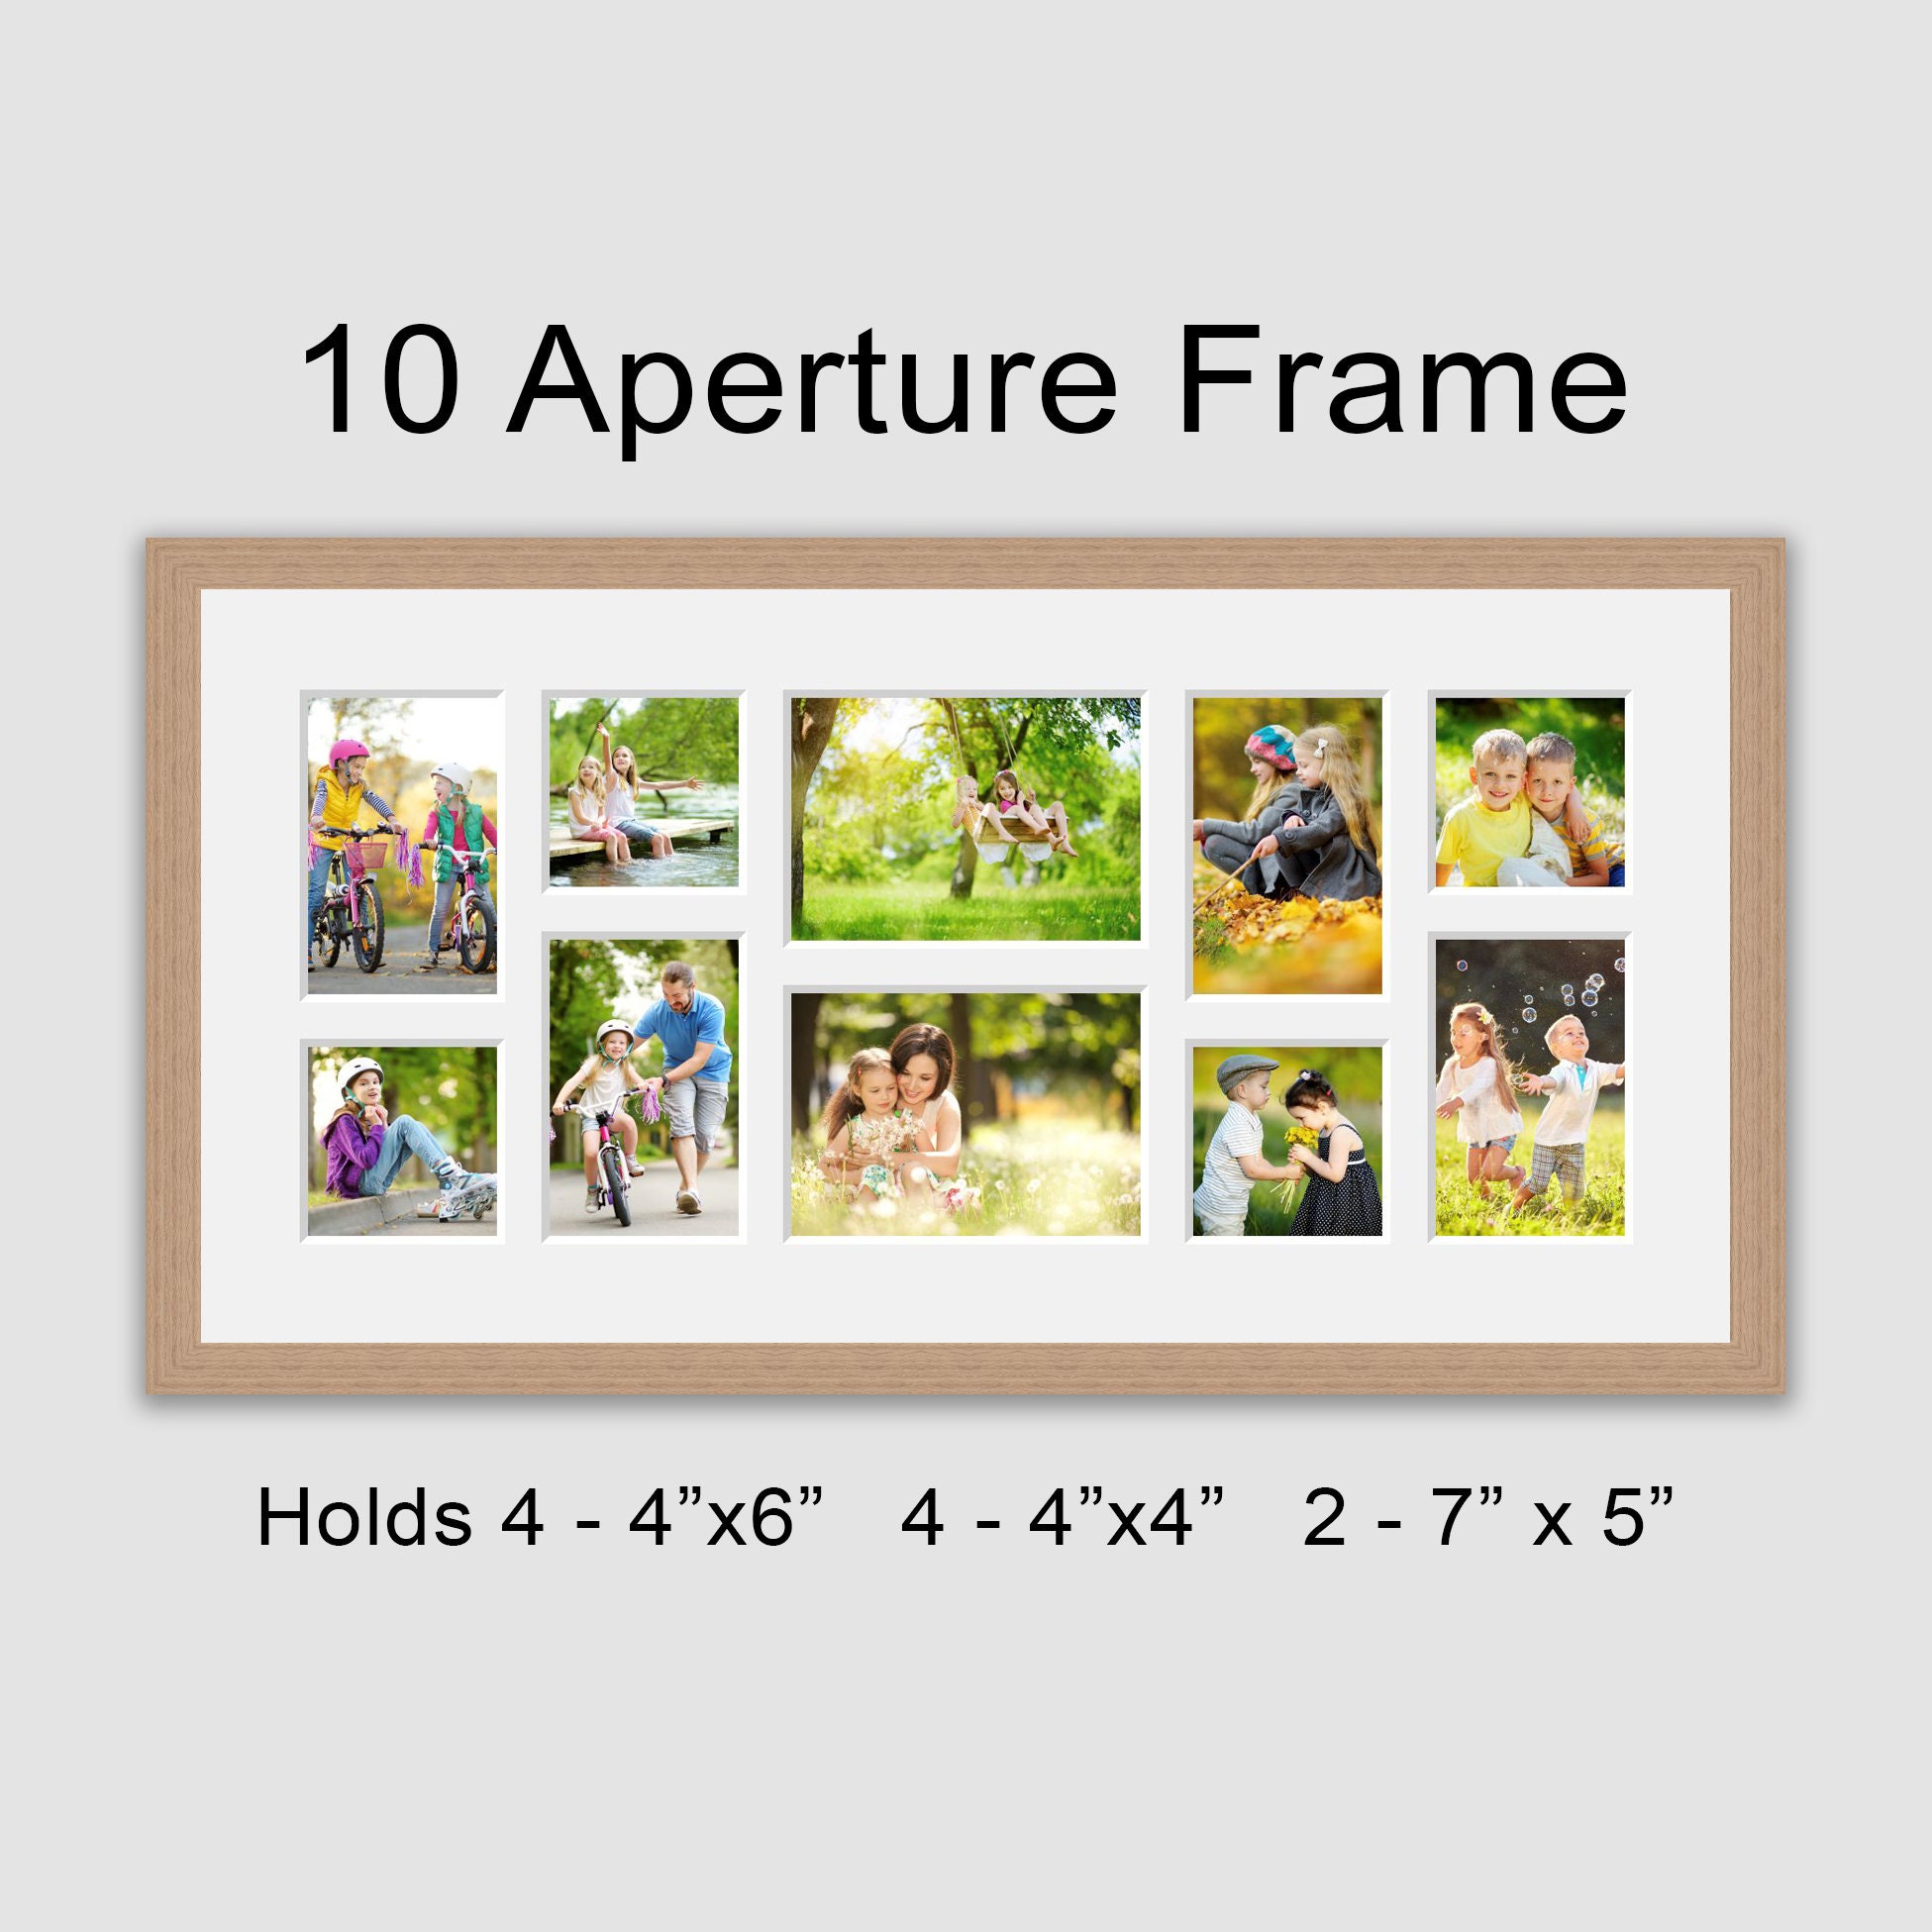 Multi Photo Picture Frame Holds 3 10x8 Photos in an Oak Veneer